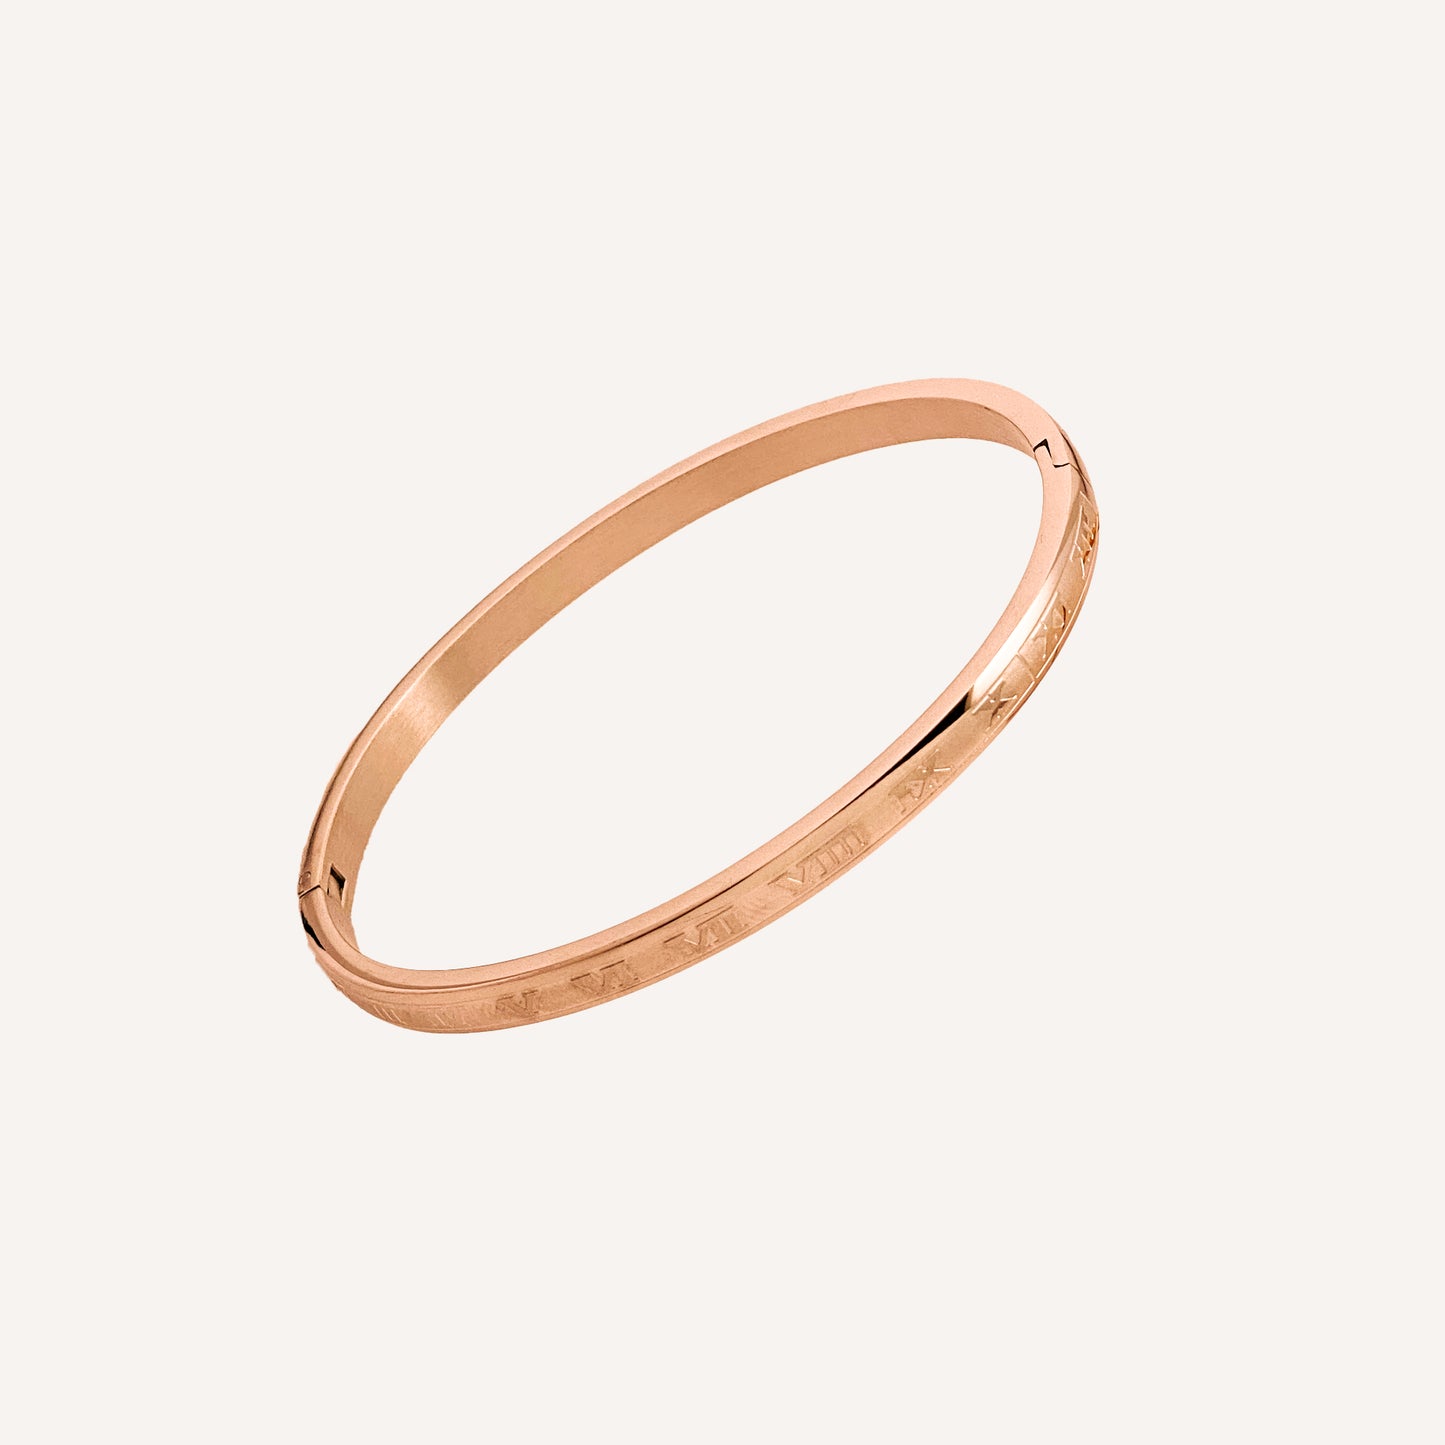 Roman Time Rounded Edge Bangle 4mm - Rose Gold